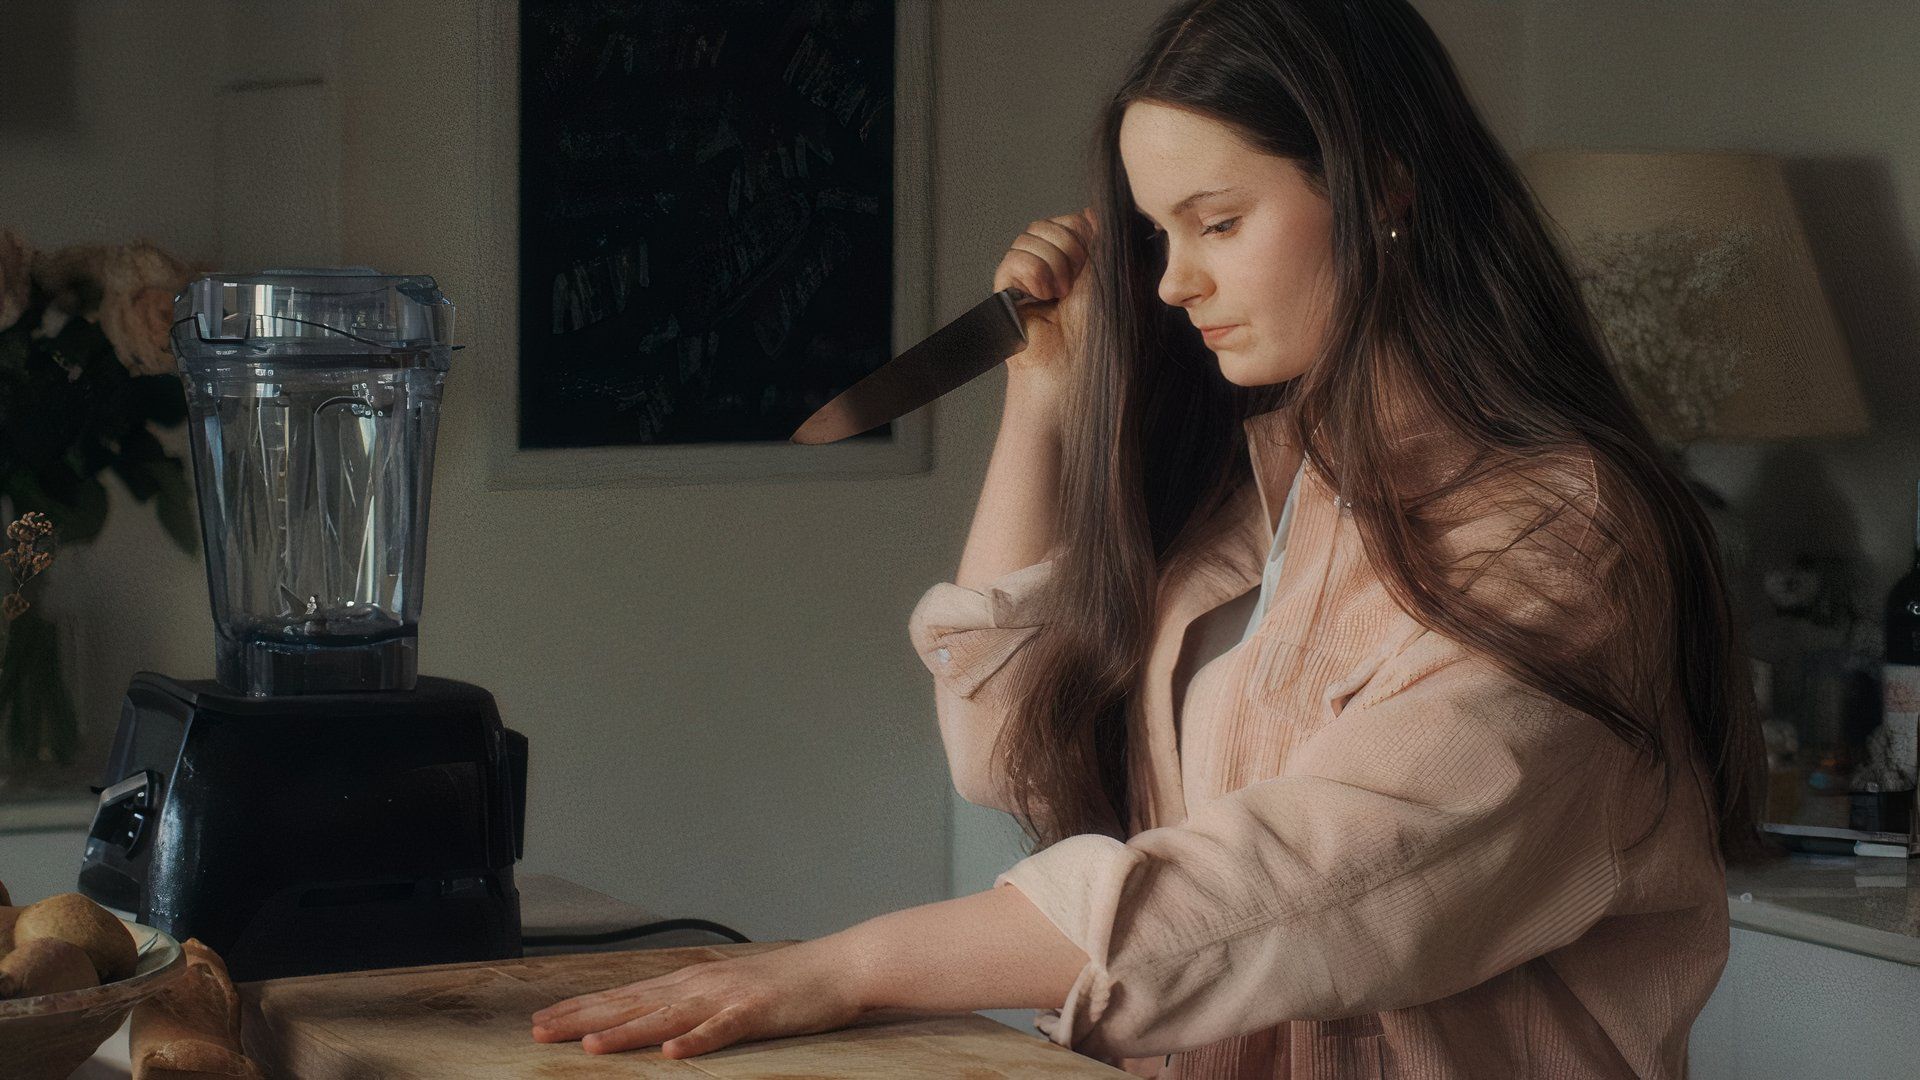 Louise Labèque as The Teenager in Coma, preparing to stab her own hand with a kitchen knife